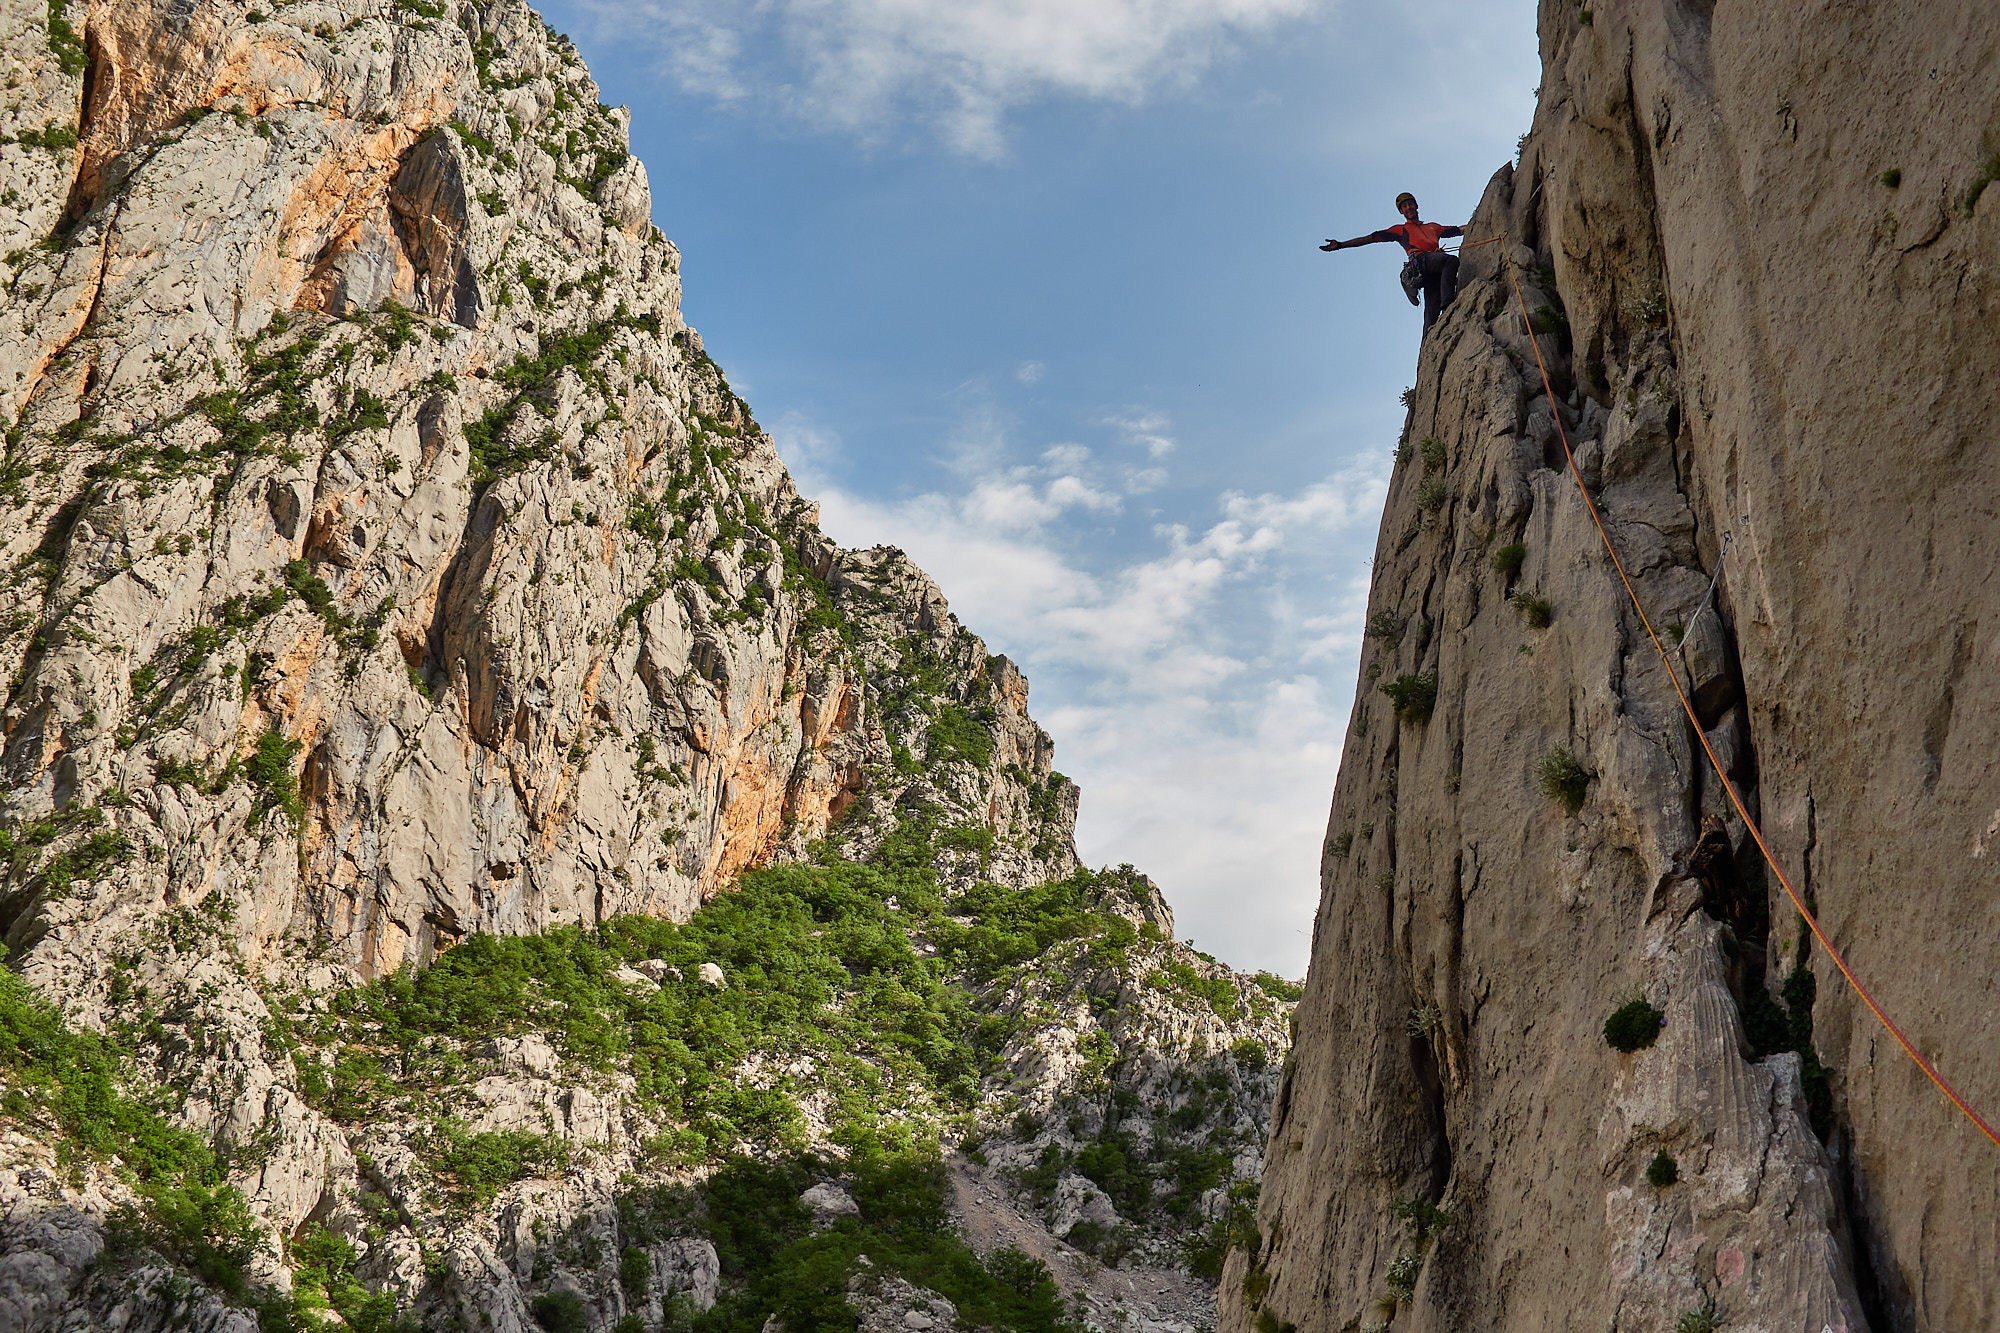 A climber on a limestone sport climb with trees and blue sky behind in the Paklenica gorge in Croatia